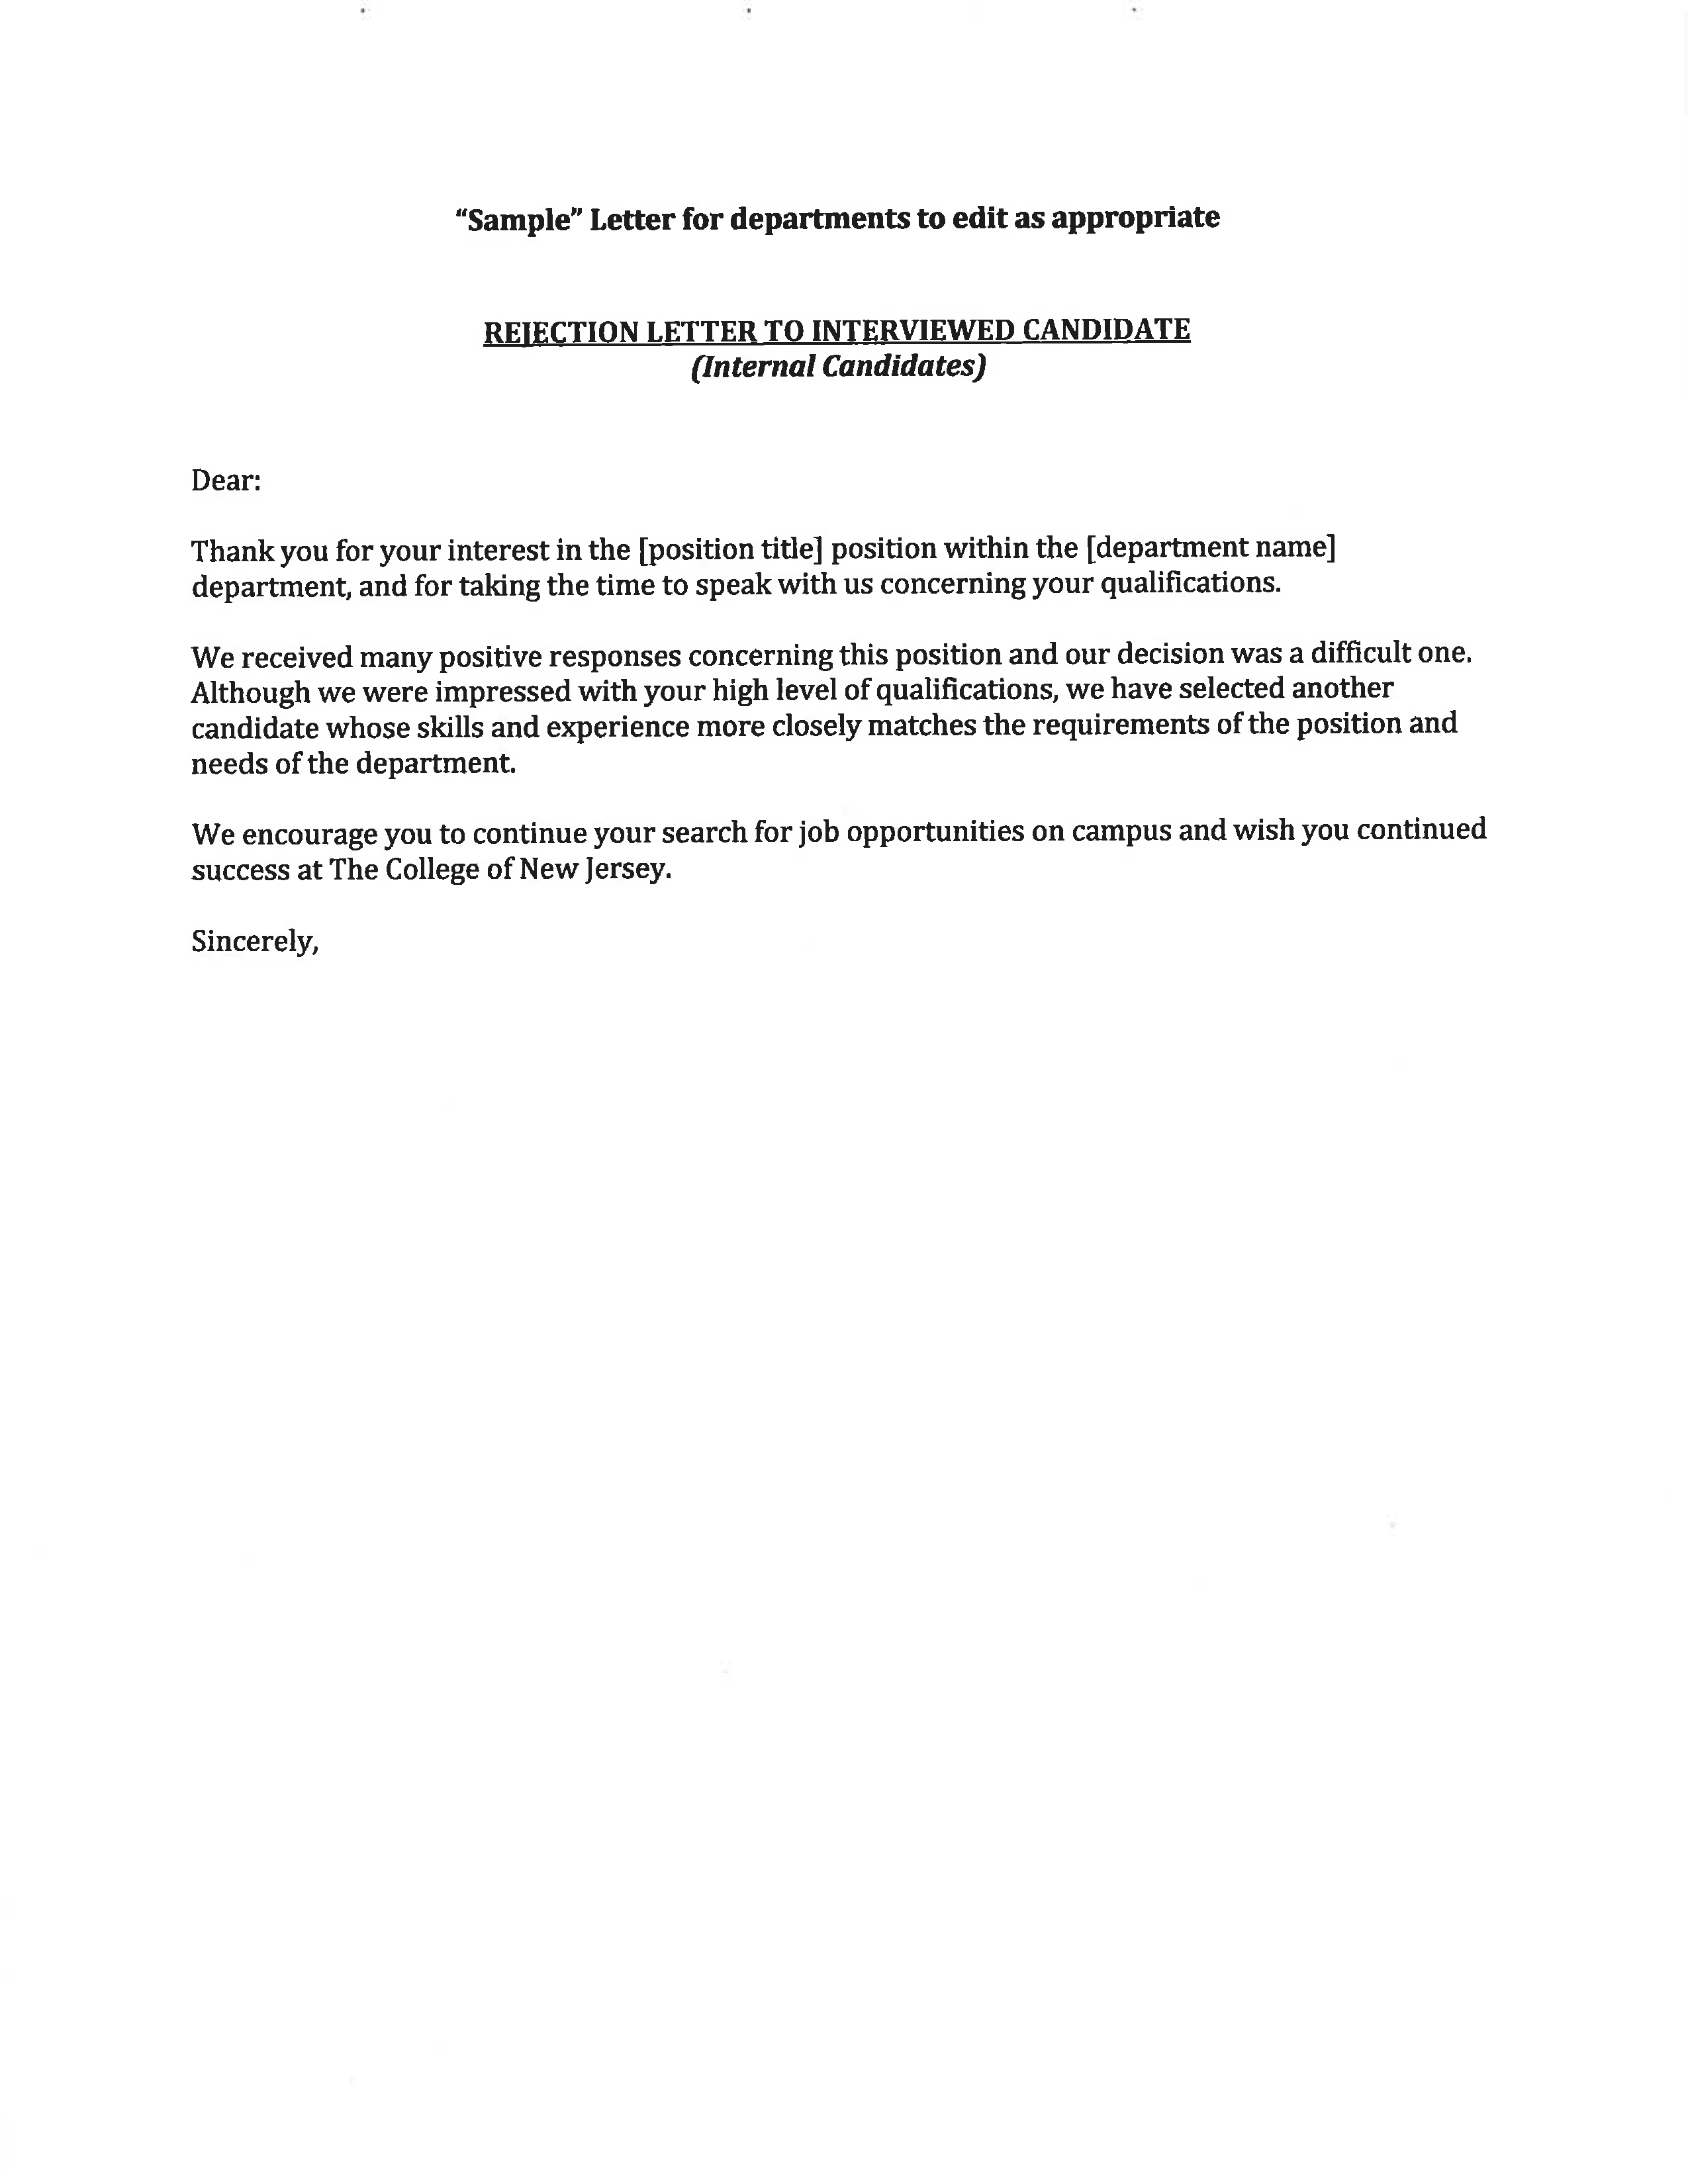 Interview Rejection Email main image